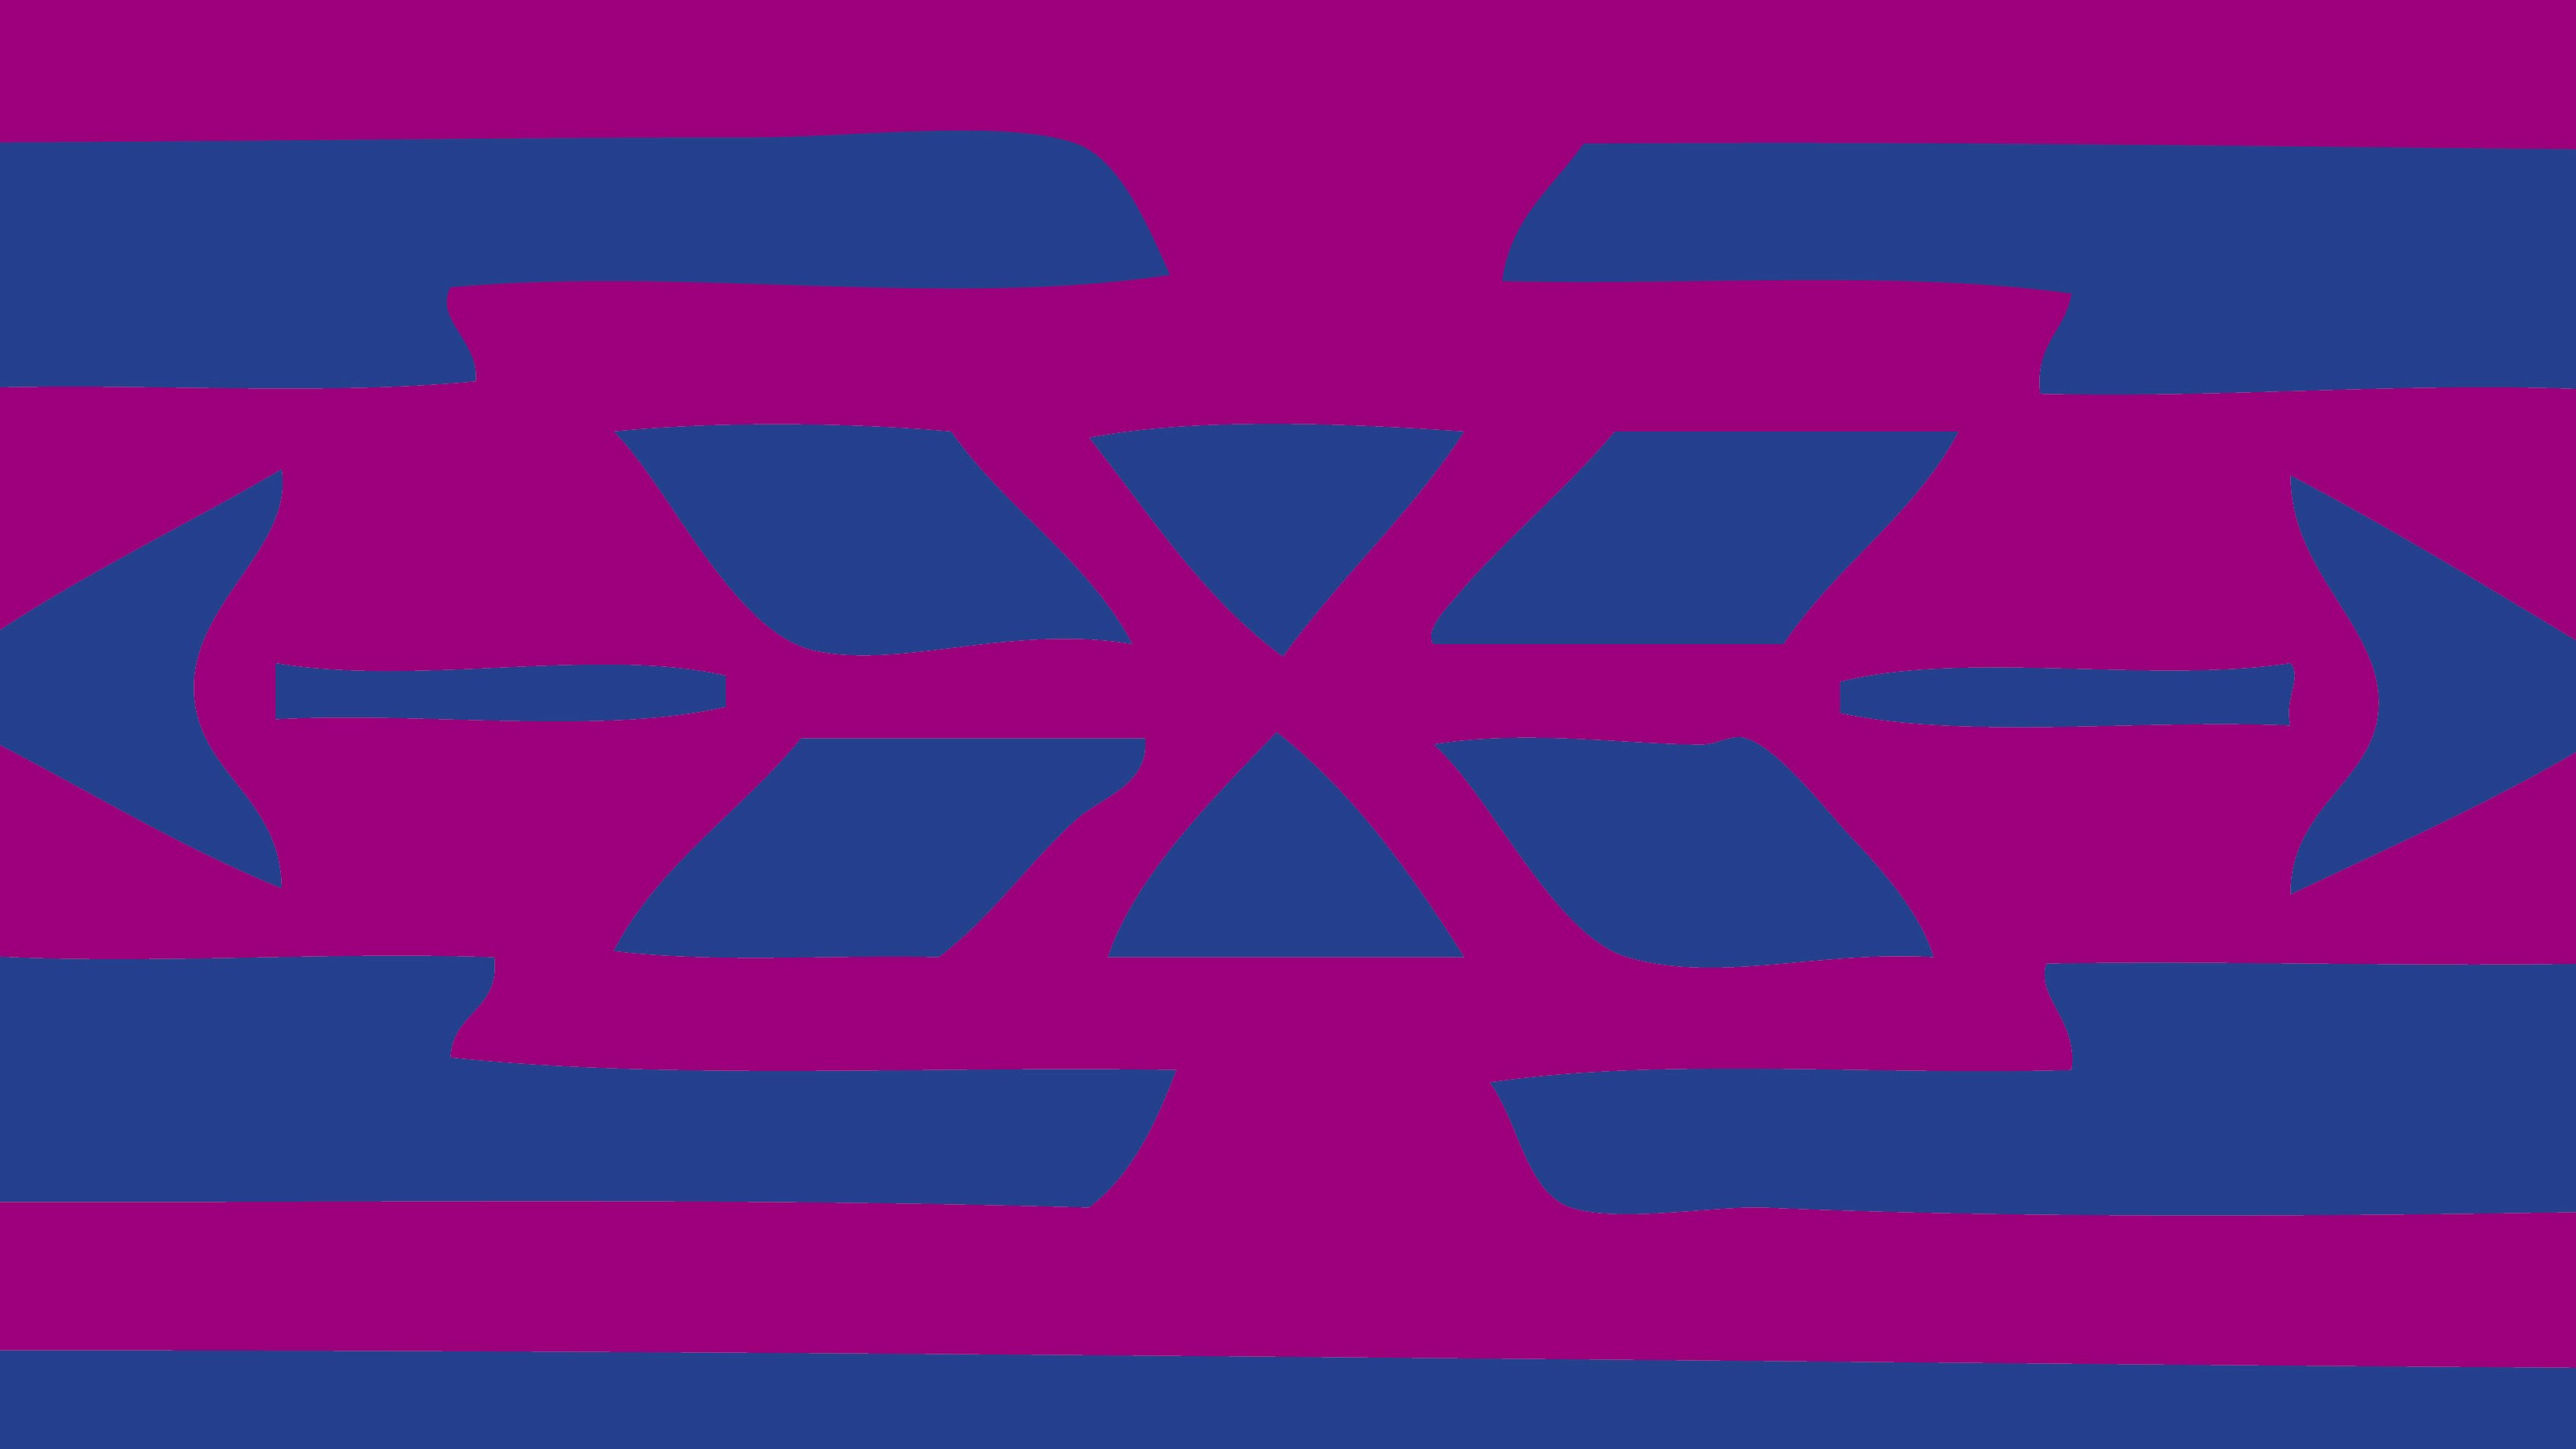 Poster design graphic in purple and magenta, with two arrows pointing in opposite directions